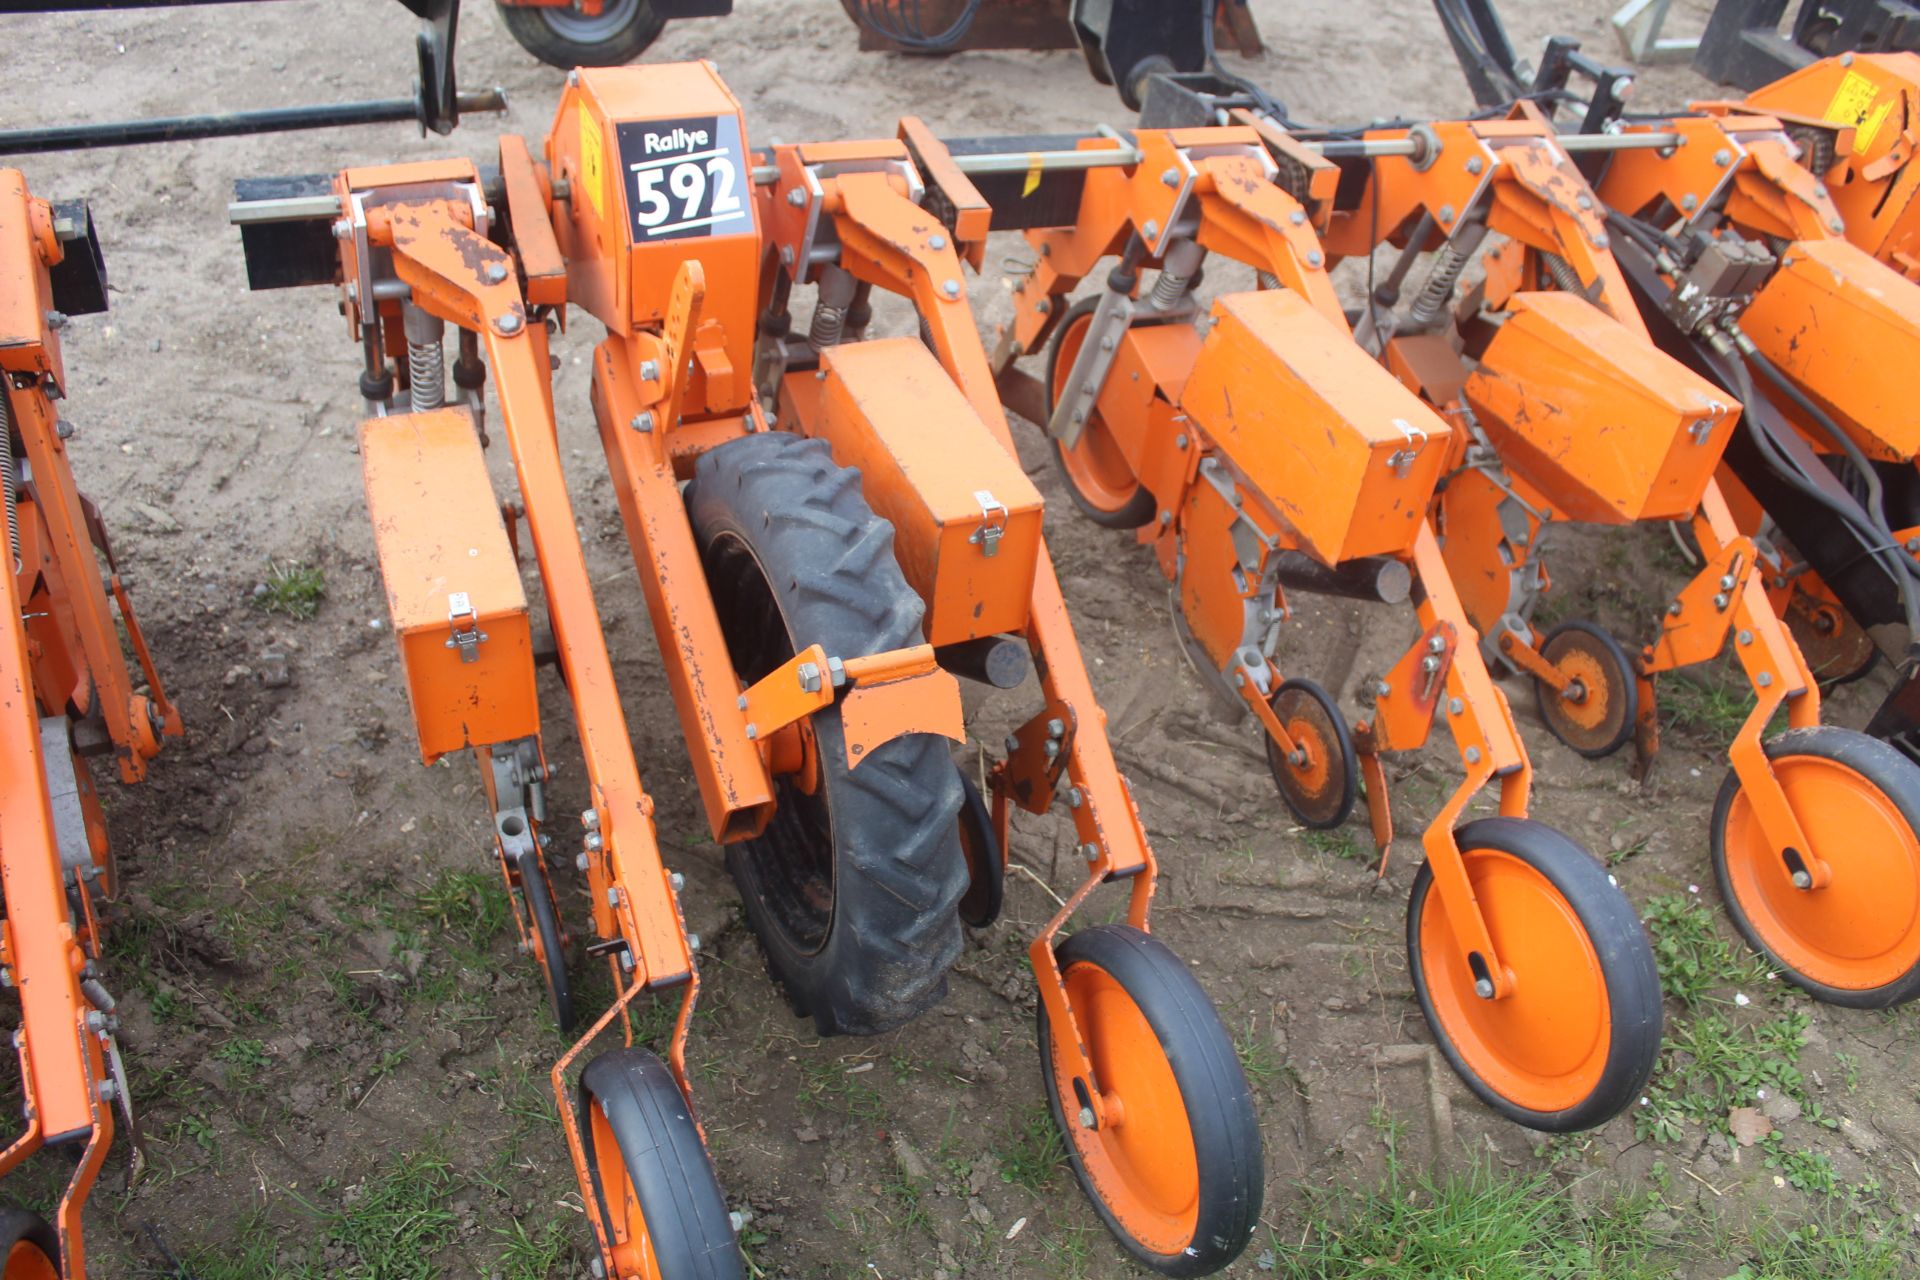 Stanhay Rallye 592 hdraulic folding 12 row beet drill. With bout markers. V - Image 17 of 28